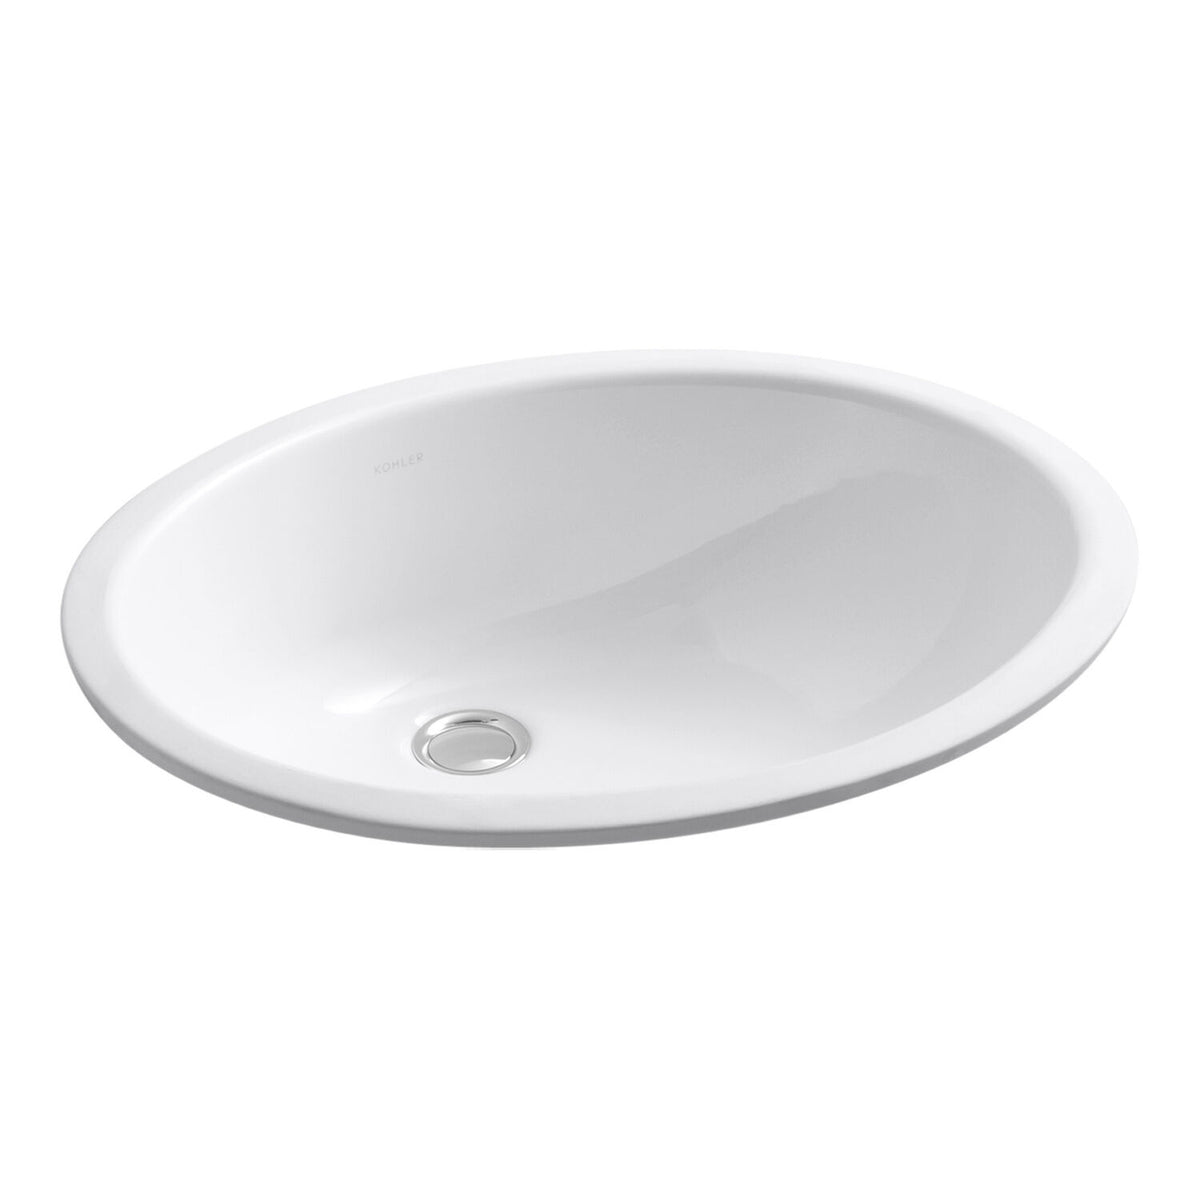 CAXTON® OVAL 17 X 14 INCHES UNDERMOUNT BATHROOM SINK WITH GLAZED UNDERSIDE AND CLAMP ASSEMBLY